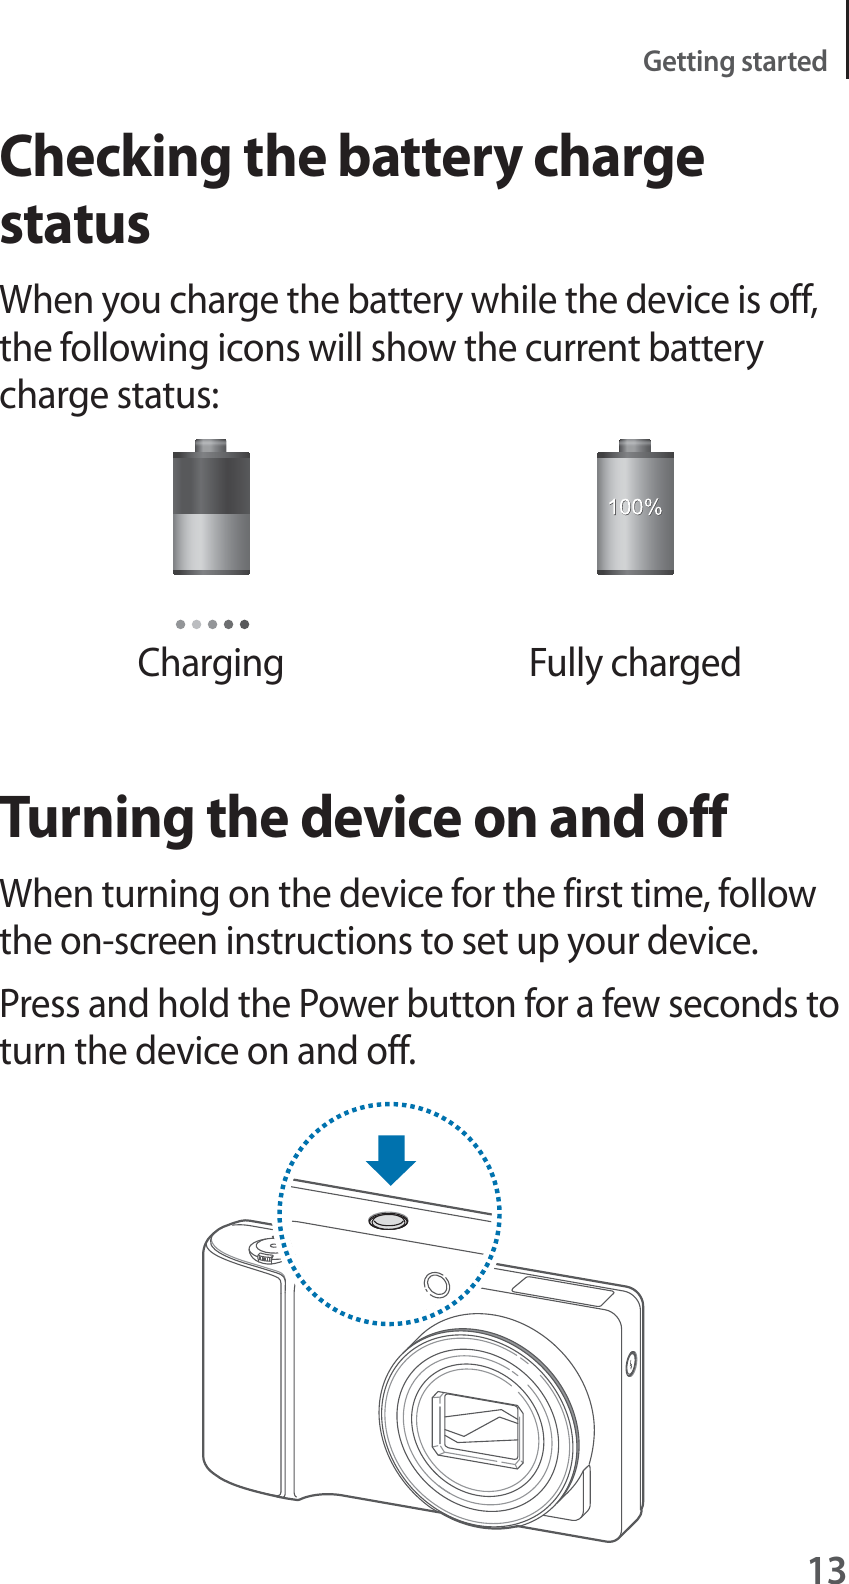 13Getting startedChecking the battery charge statusWhen you charge the battery while the device is off, the following icons will show the current battery charge status:Charging Fully chargedTurning the device on and offWhen turning on the device for the first time, follow the on-screen instructions to set up your device.Press and hold the Power button for a few seconds to turn the device on and off.